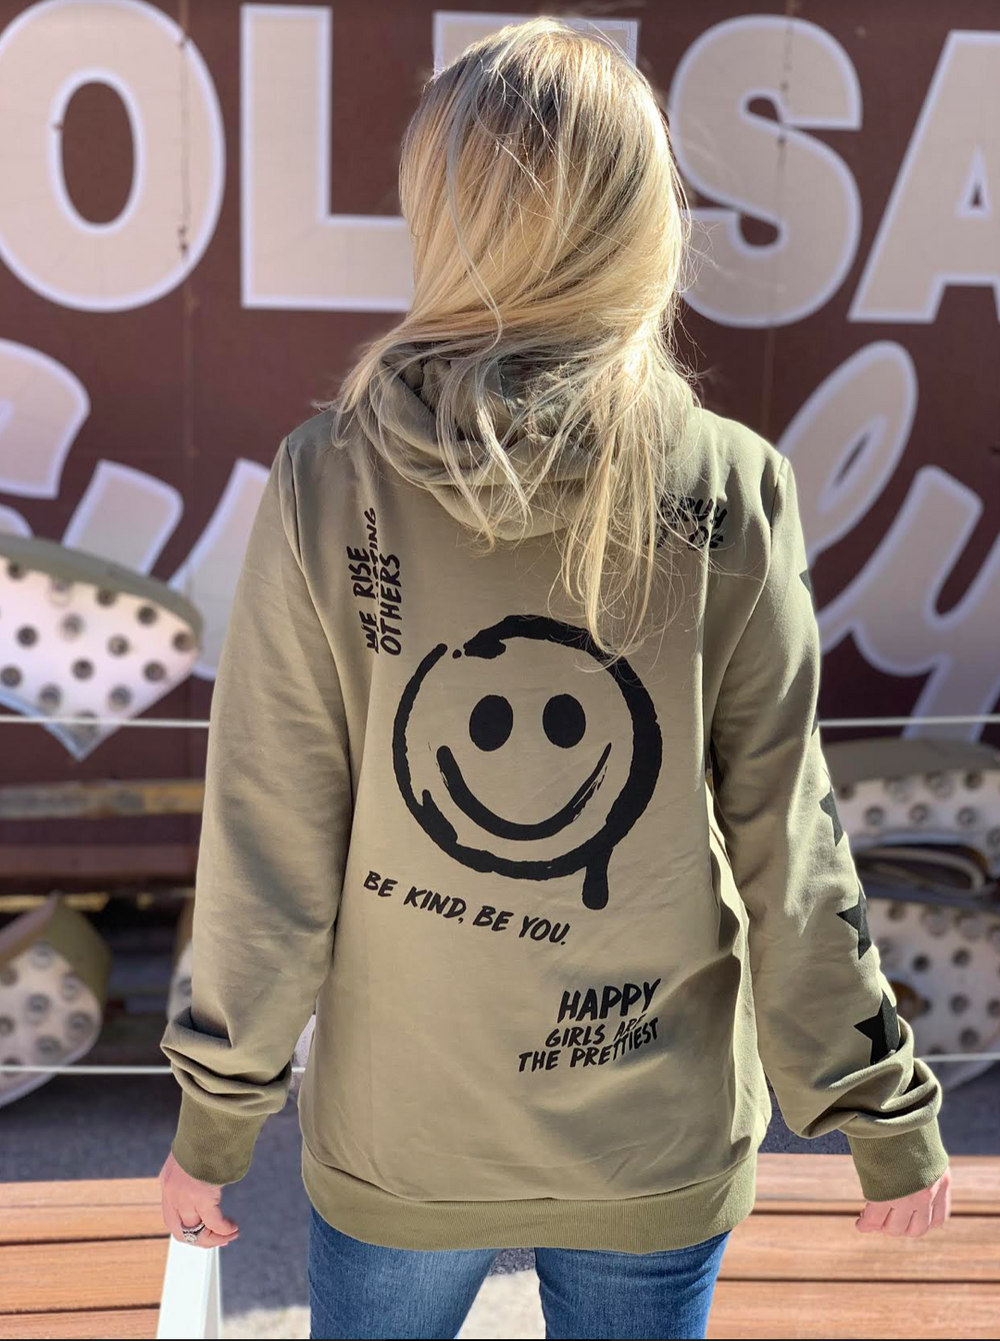 Soul Candy Hoodie- Adult